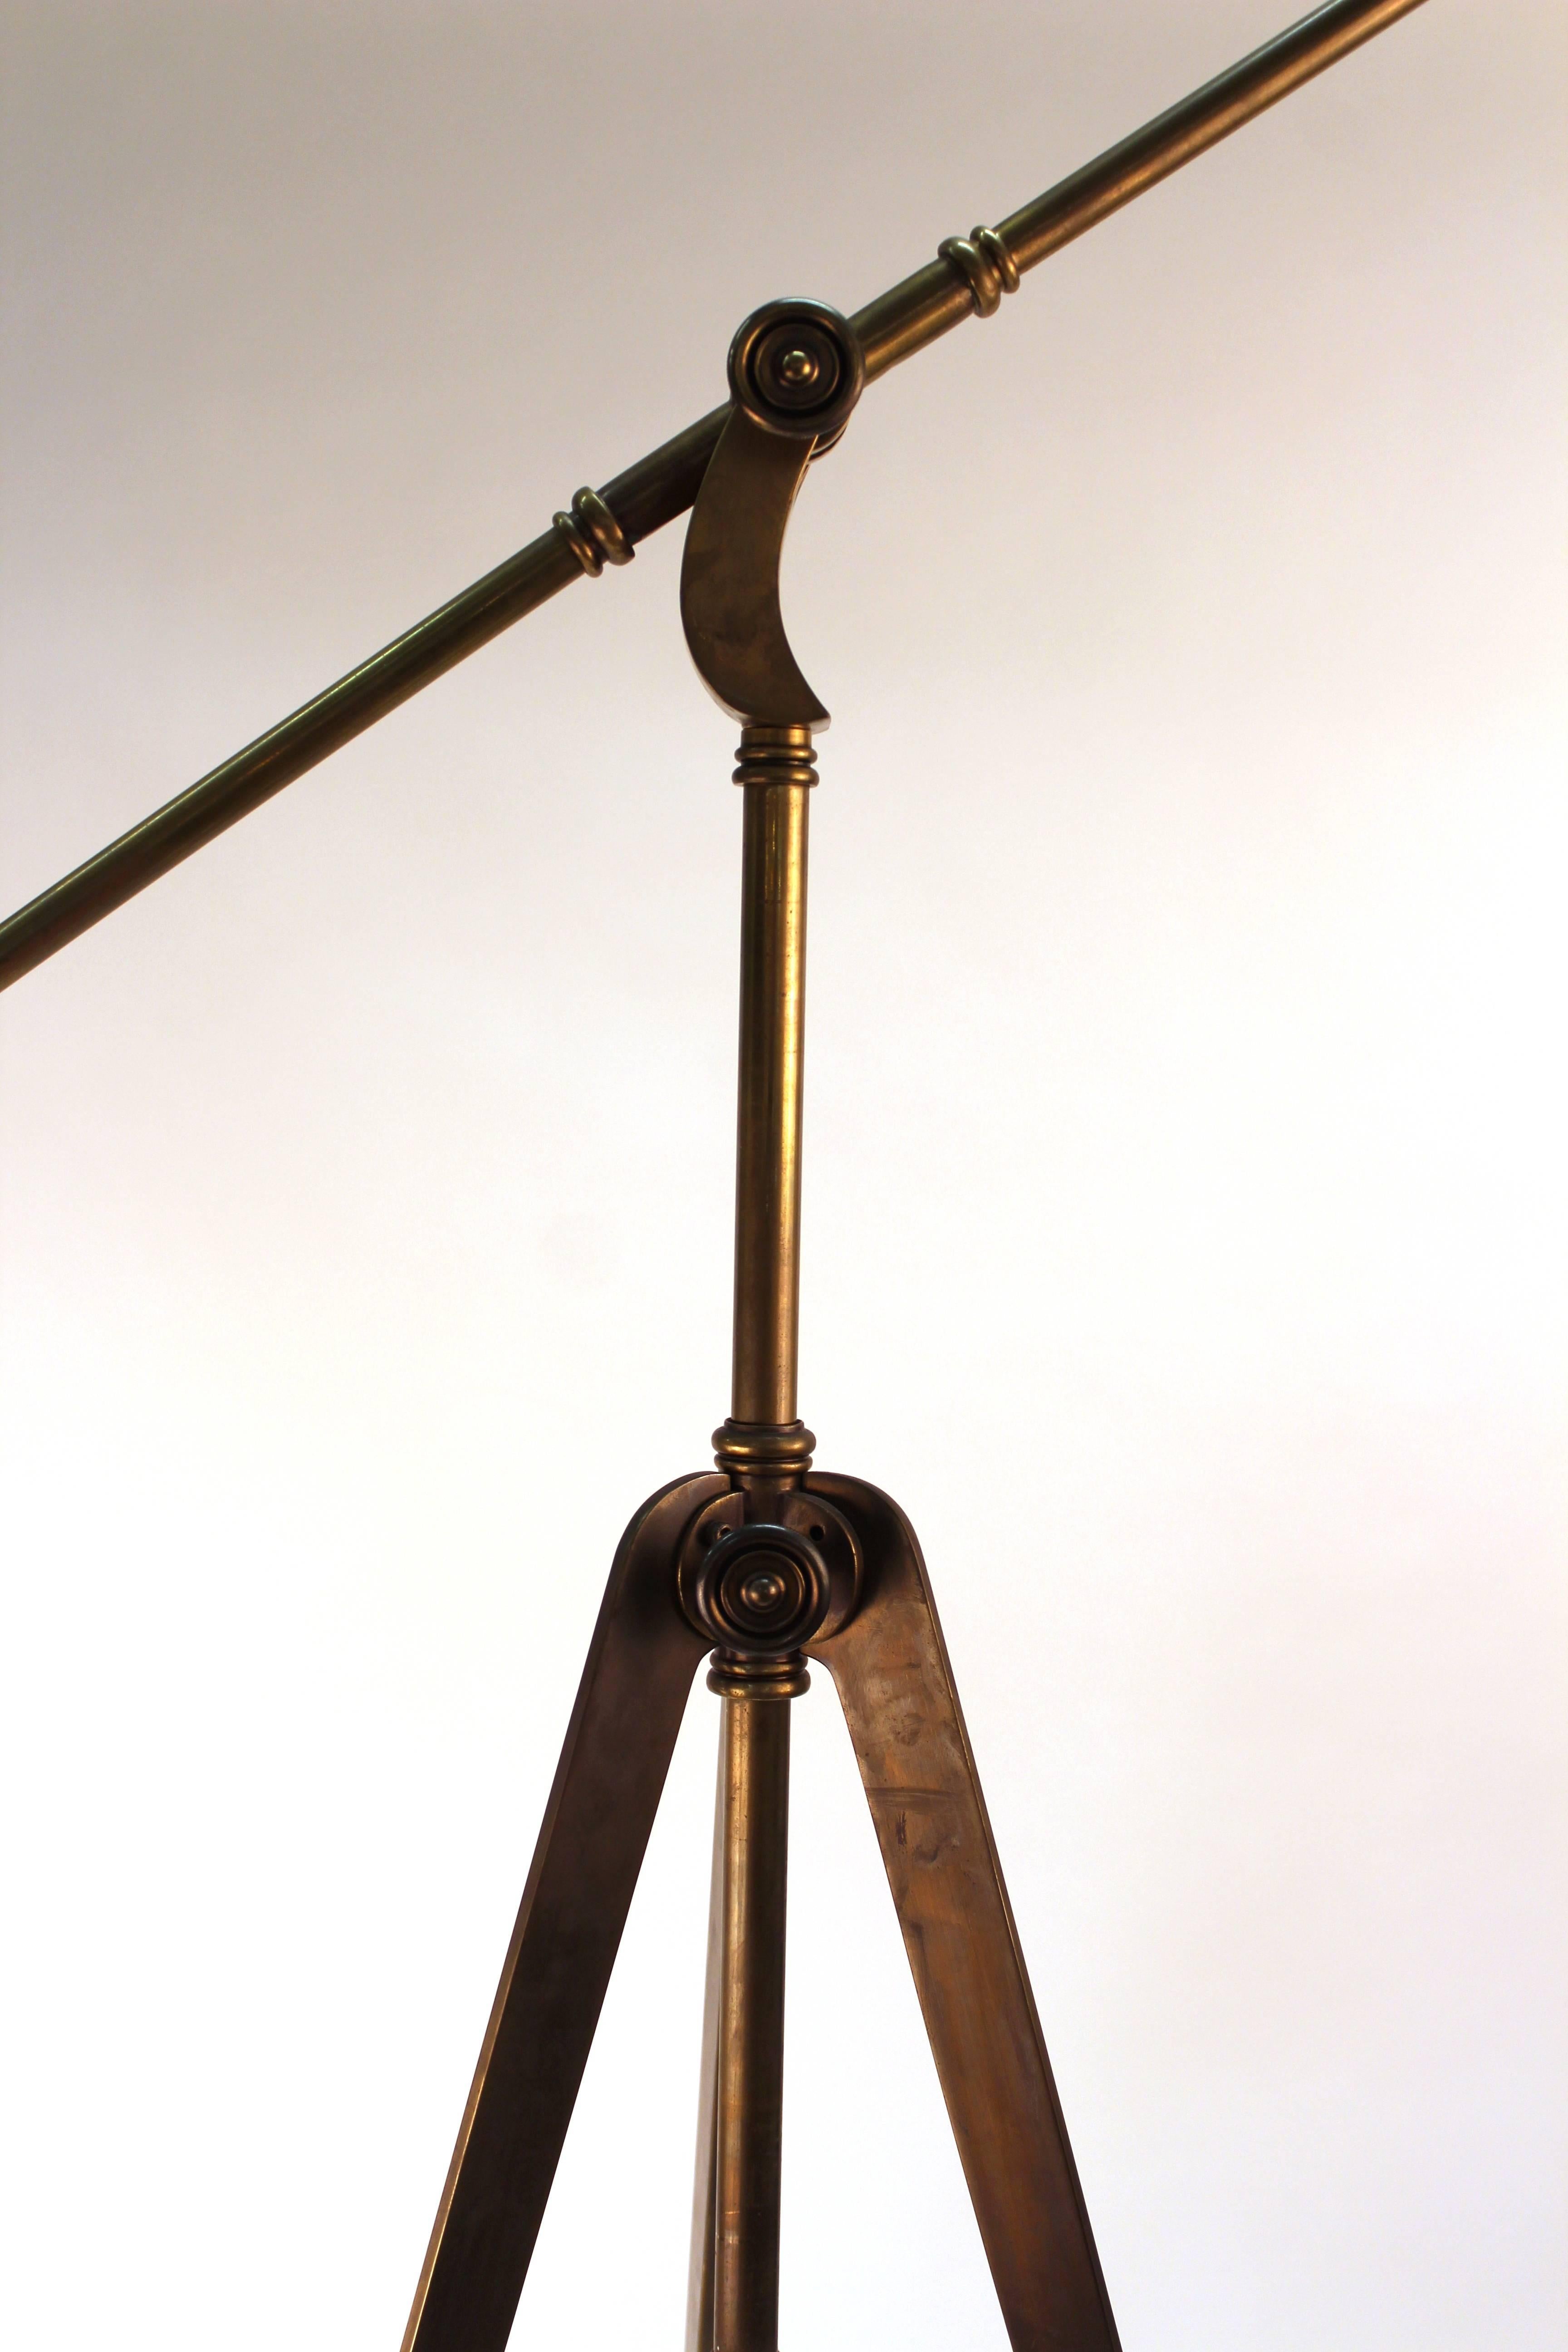 Industrial style reading lamp. Adjustable neck stands on a tripod base. Completely crafted in patinated brass. Wear appropriate to age and use. The lamp is in good condition.